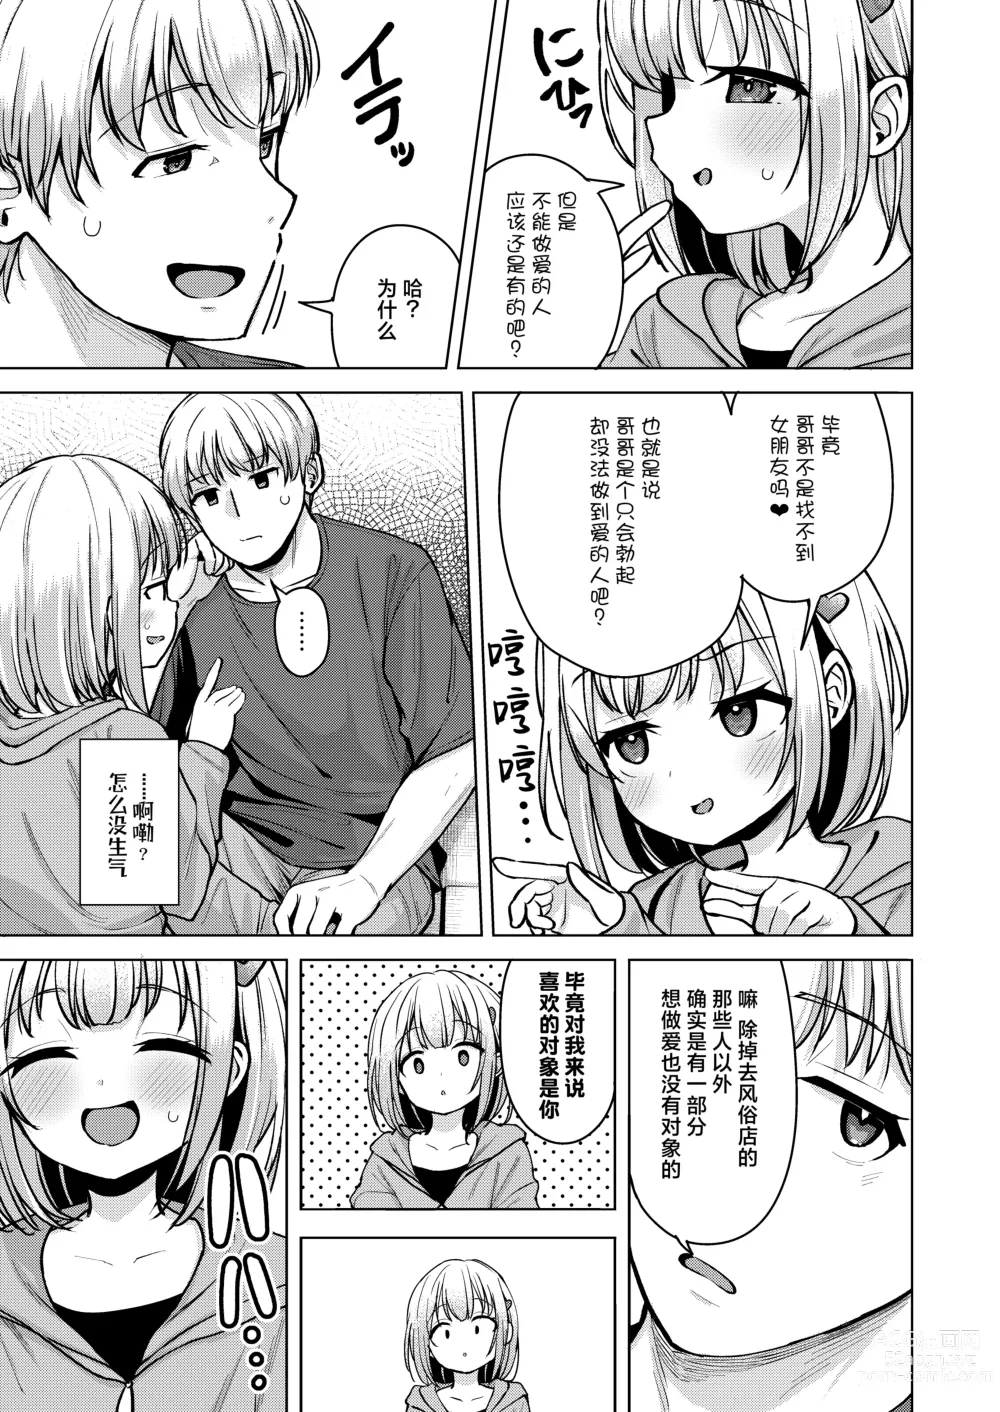 Page 7 of doujinshi 邪心妹妹真是太棒了